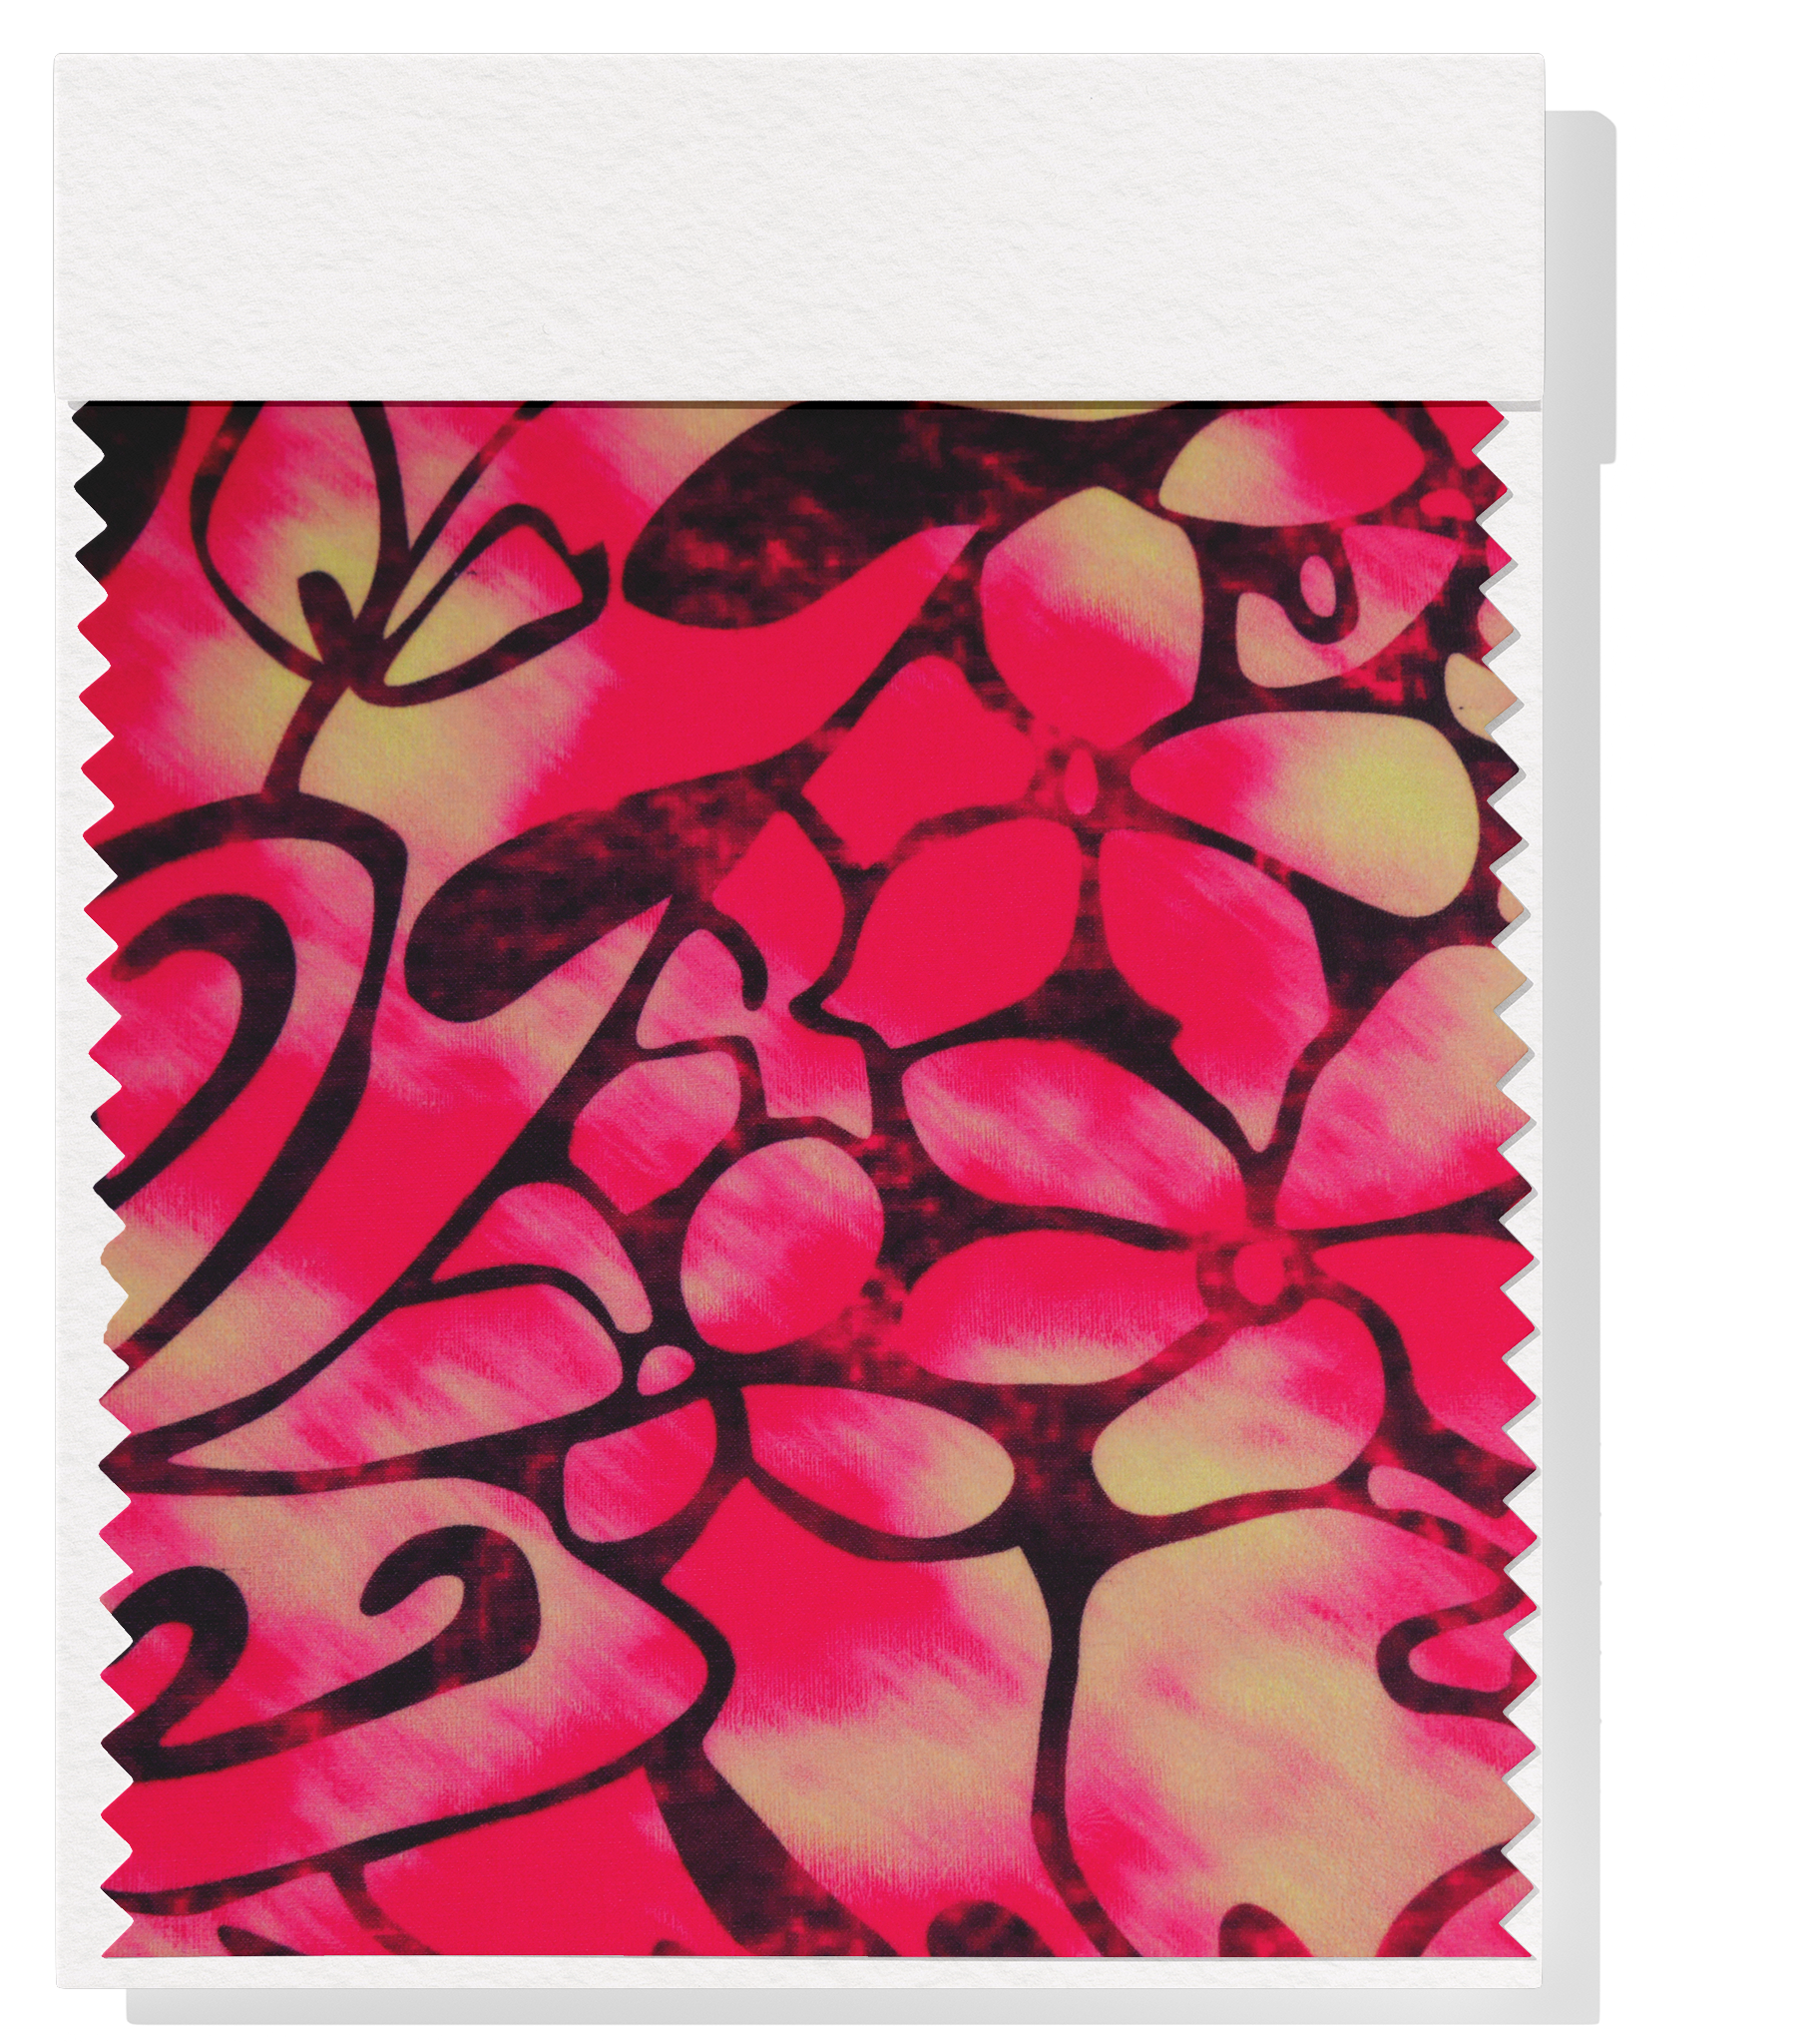 Stretch Polyester Pacific Screen Print $12.00p/m - Hot Pink & Yellow